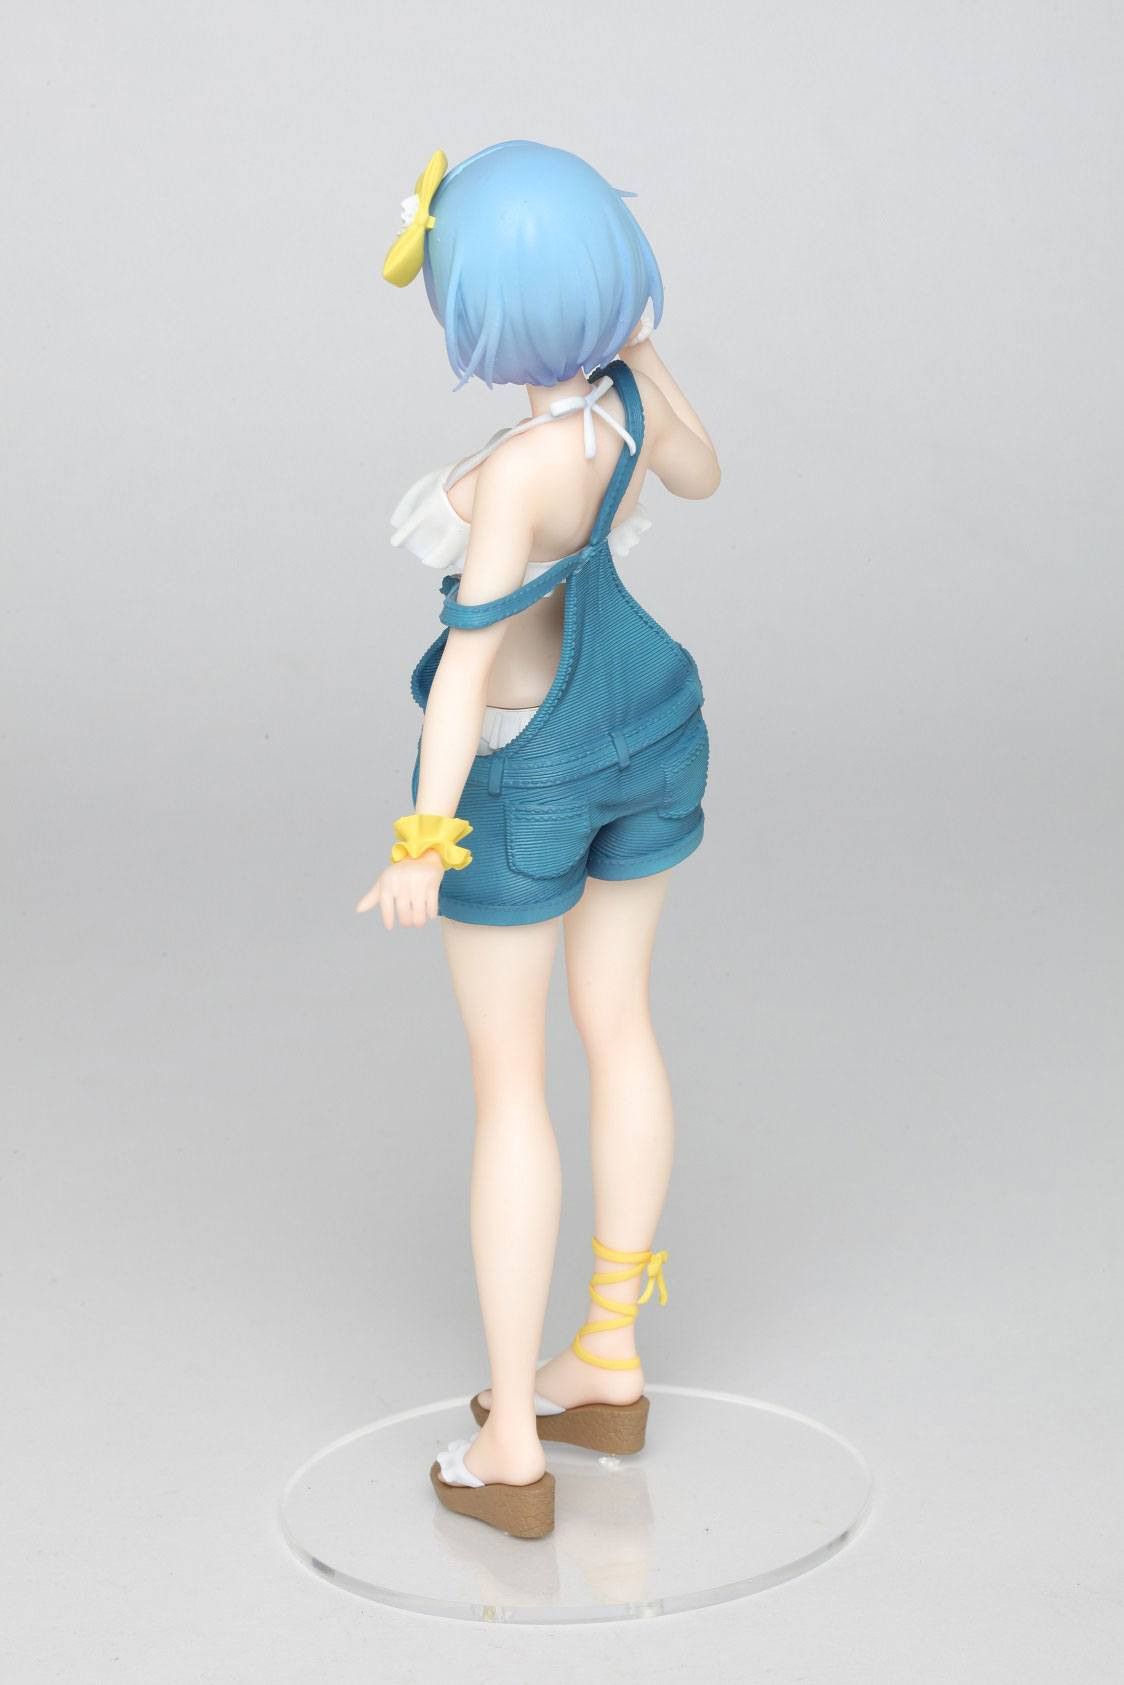 Rem Overalls Ver Figure - Re:ZERO -Starting Life in Another World- - Glacier Hobbies - Taito